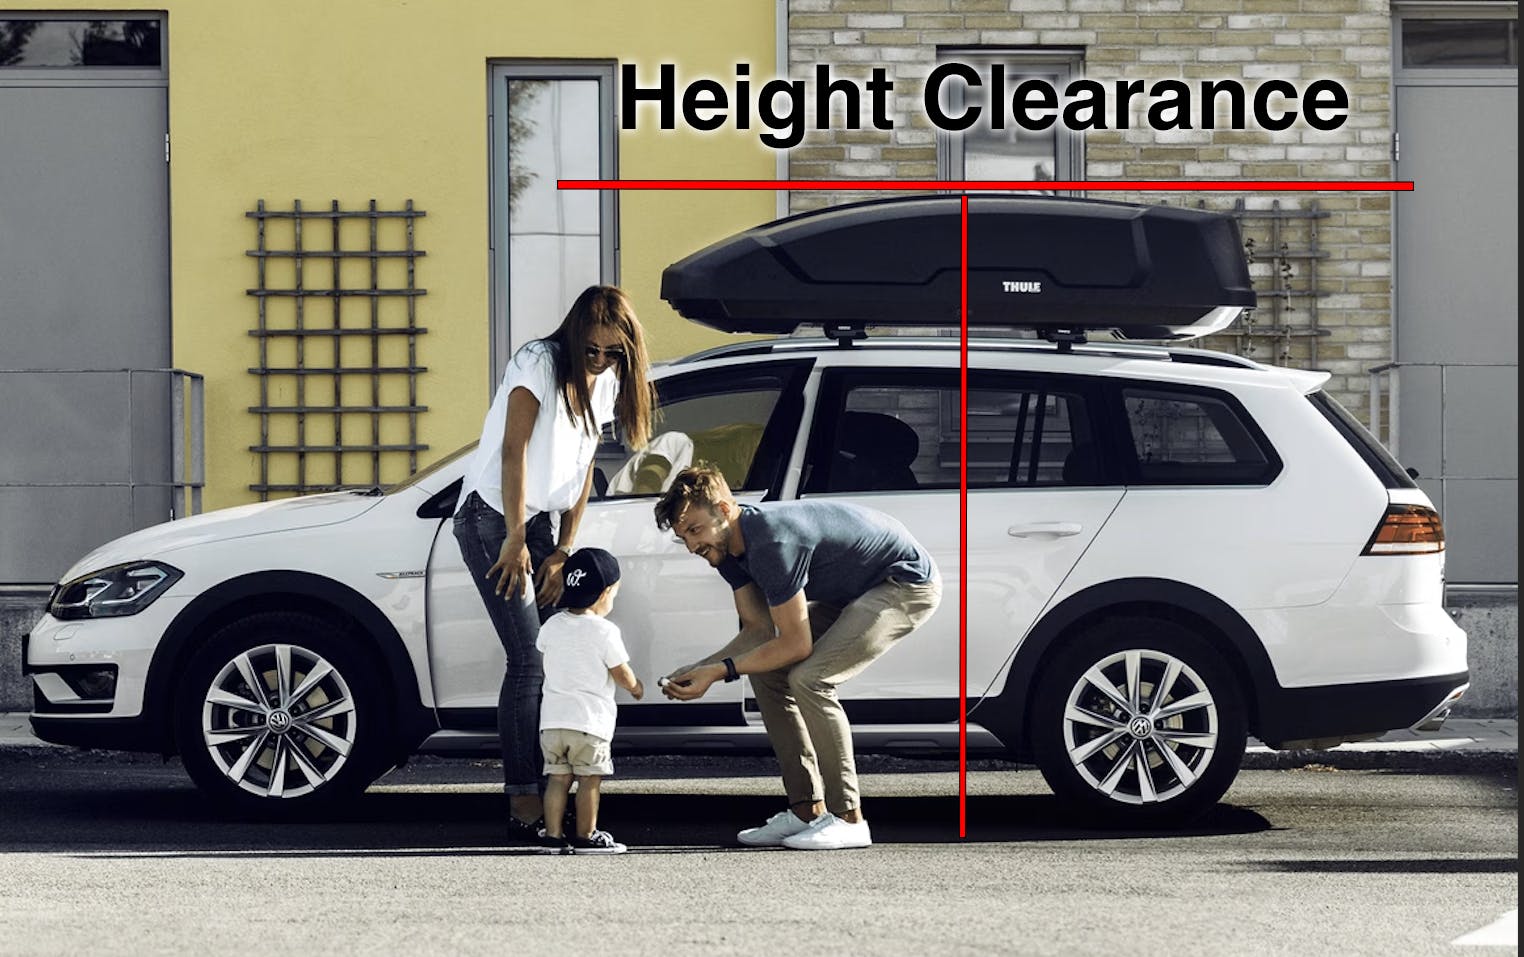 How to choose the right size Rooftop Cargo Carrier for your Vehicle